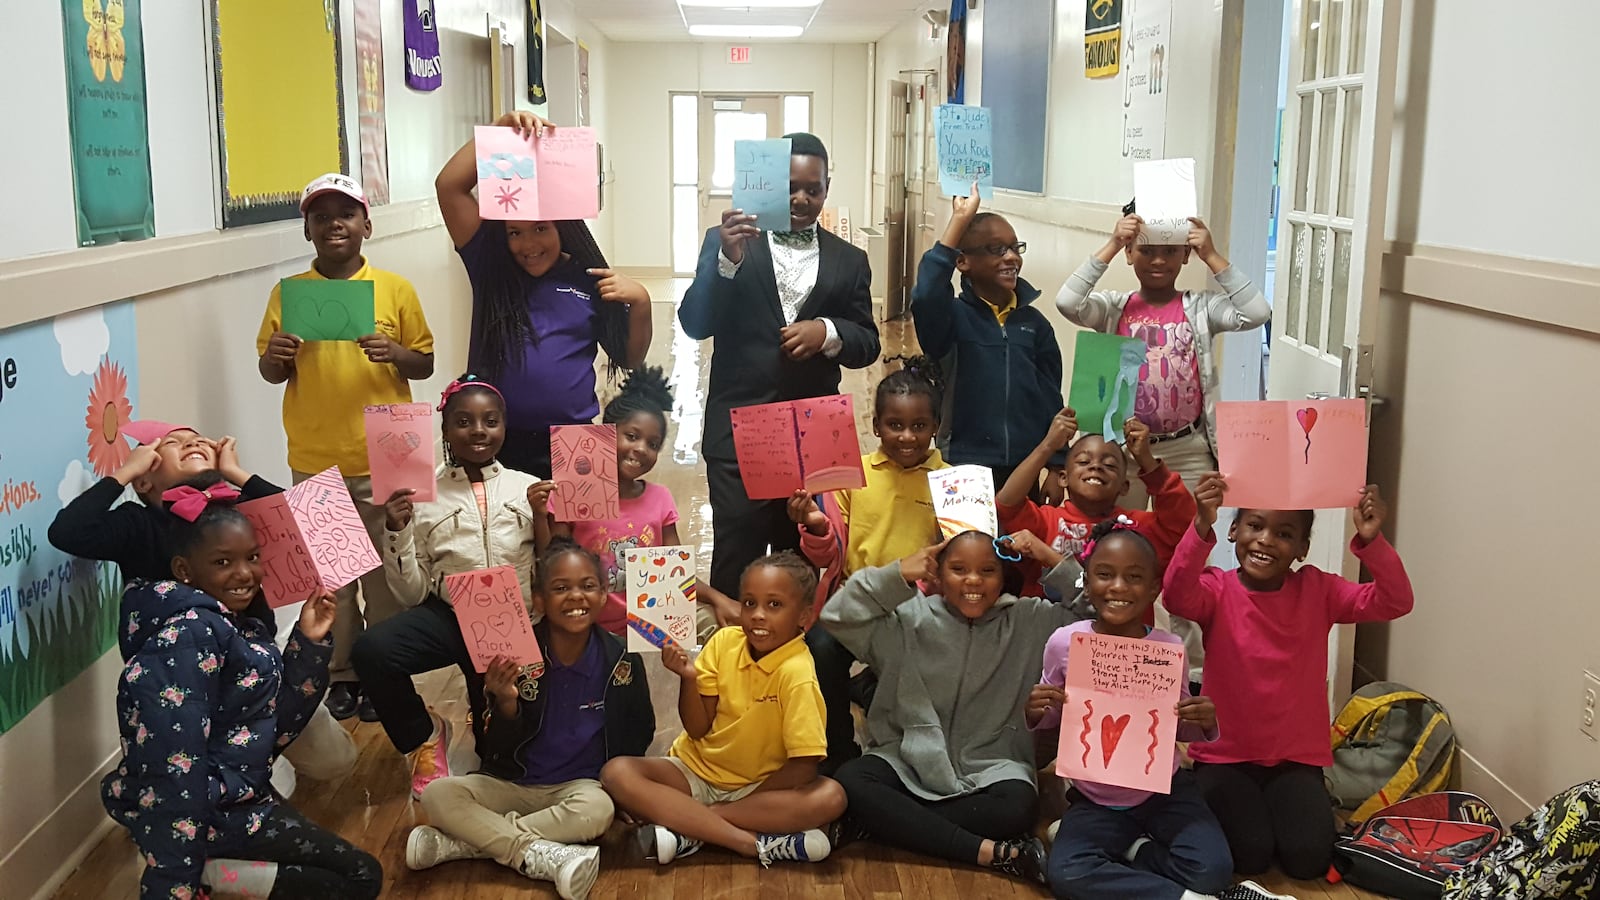 Memphis students show off "cancer awareness" posters they created as part of a Boys & Girls Club program at Promise Academy, a charter school in Raleigh. Three more clubs could open in Memphis schools by 2018.